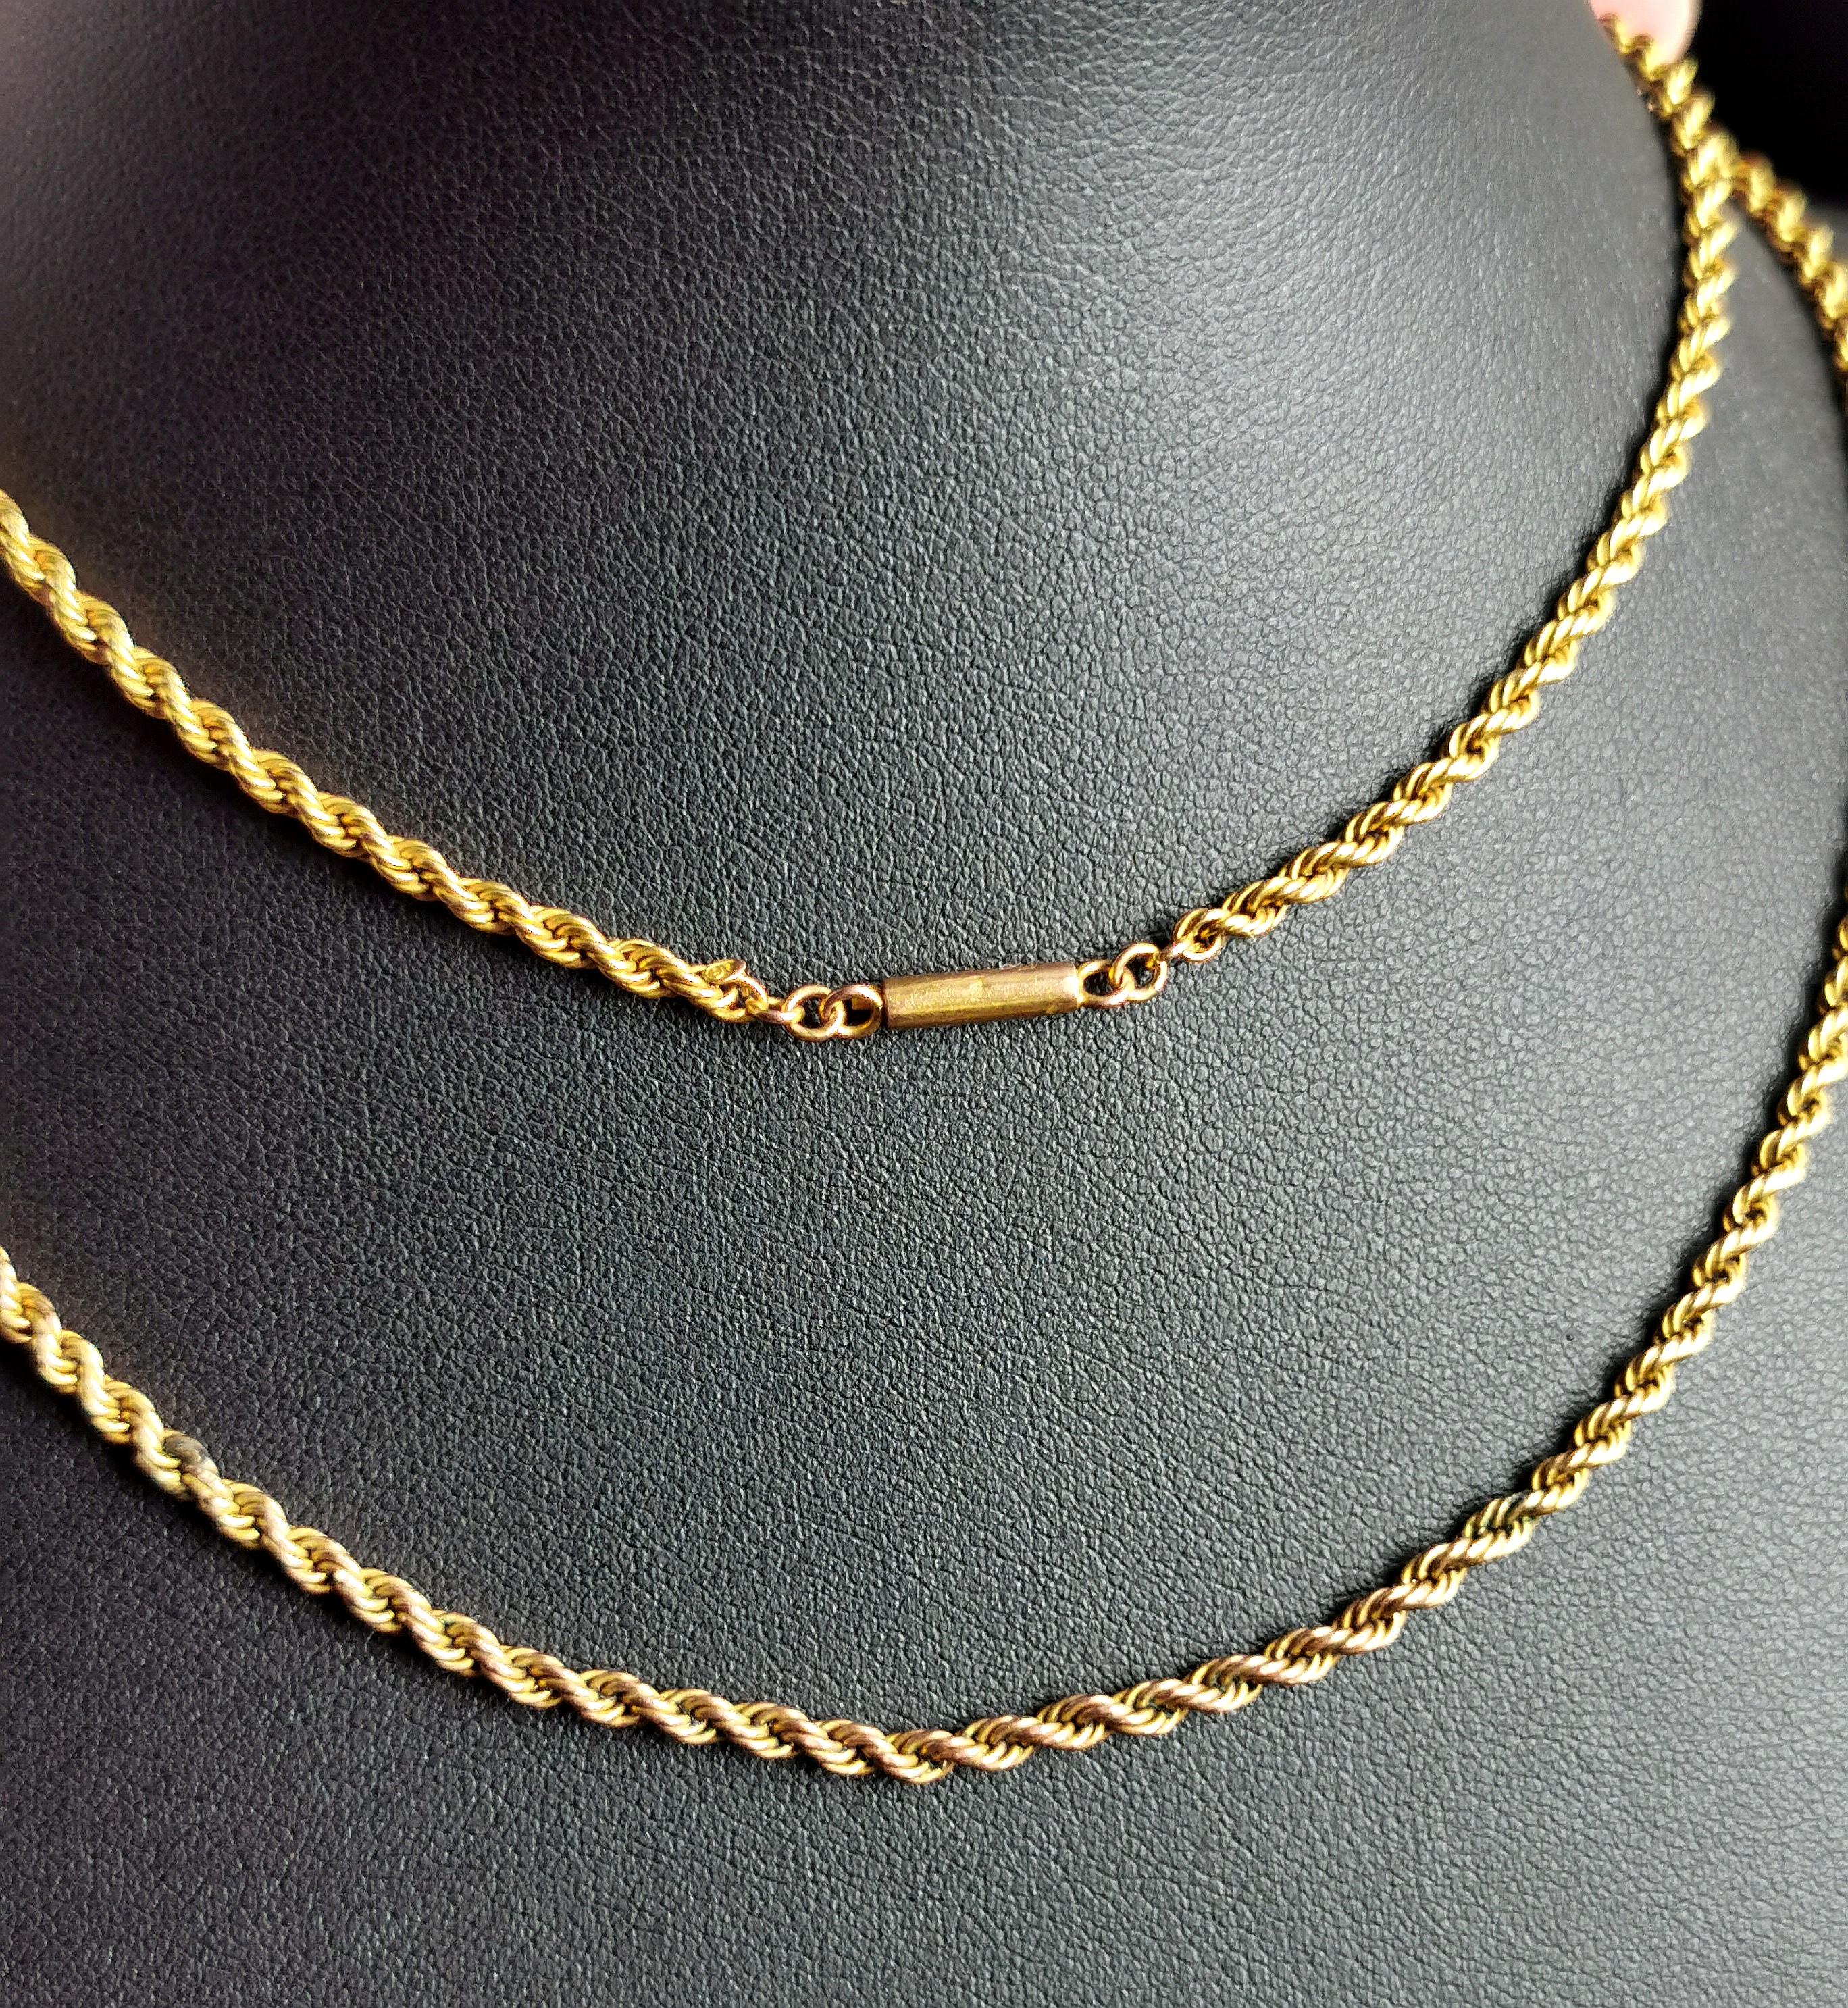 A gorgeous antique, Edwardian era 9kt gold rope Chain necklace.

Rope twist links in a rich bloomed 9kt gold with a nice wearable length.

This beautiful chain necklace is perfect for layering and fastens with a barrel clasp, the chain has a 9c tag